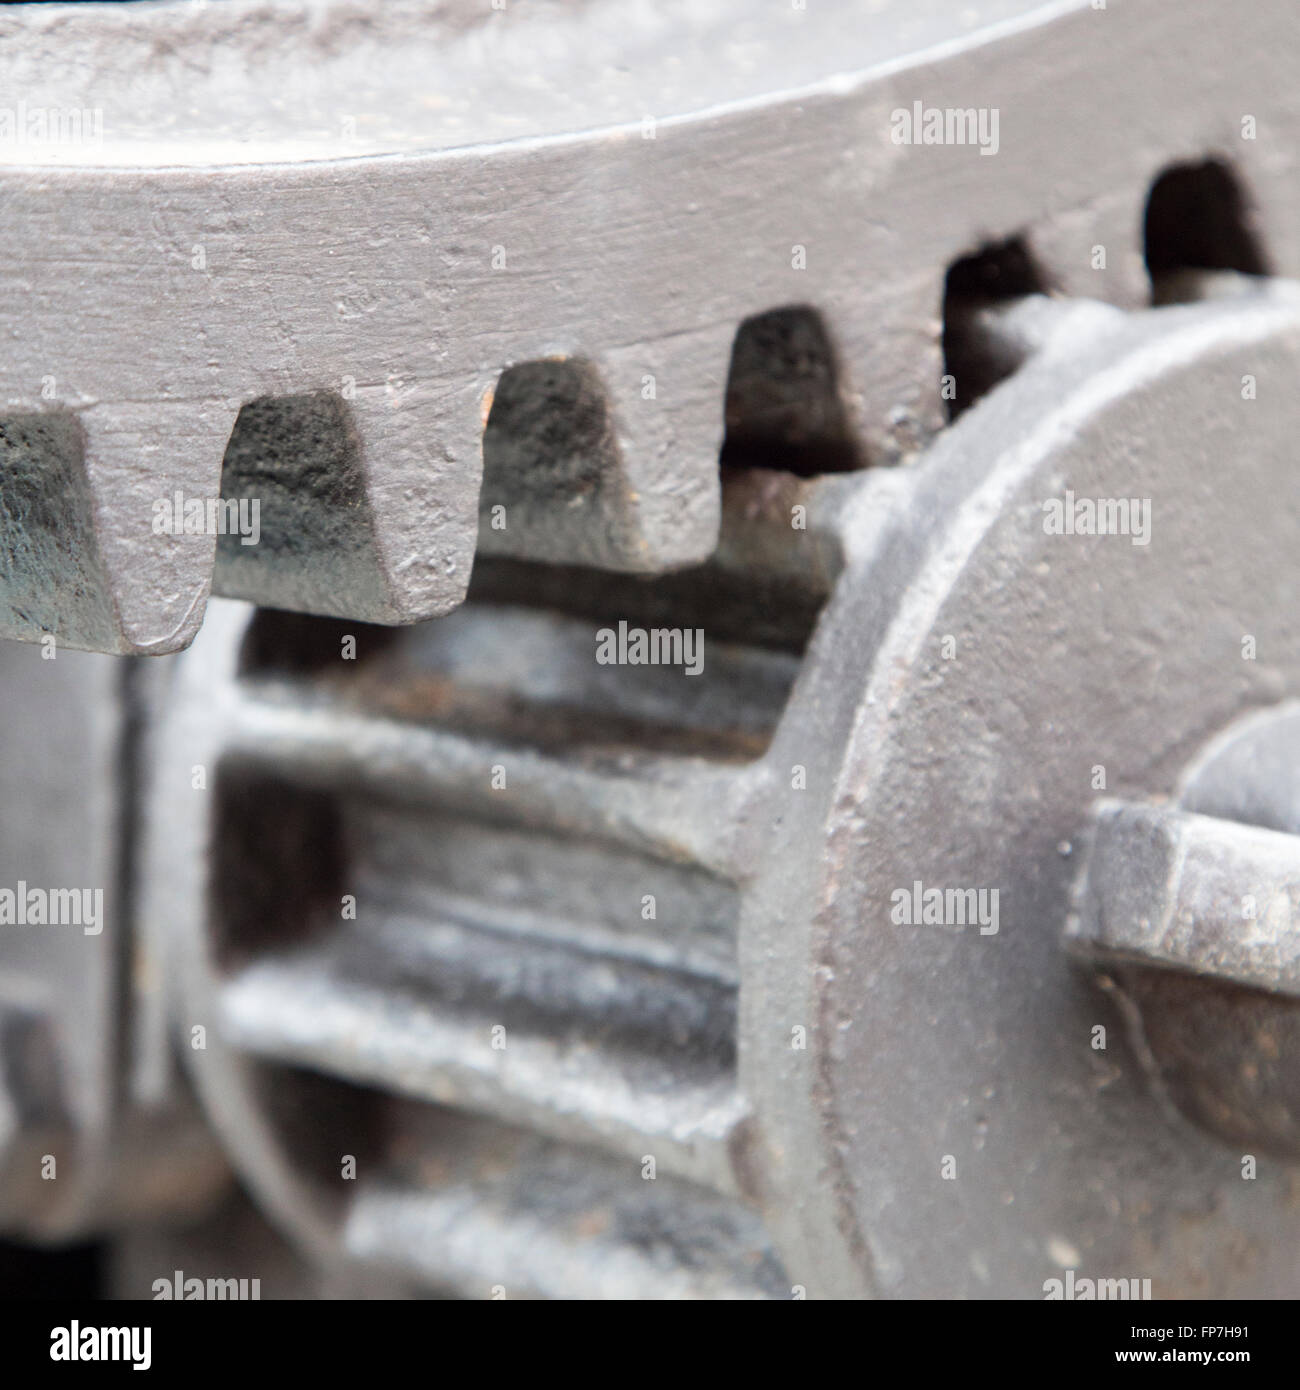 Extreme close up on cast iron gear teeth painted silver for industrial concepts or backgrounds Stock Photo